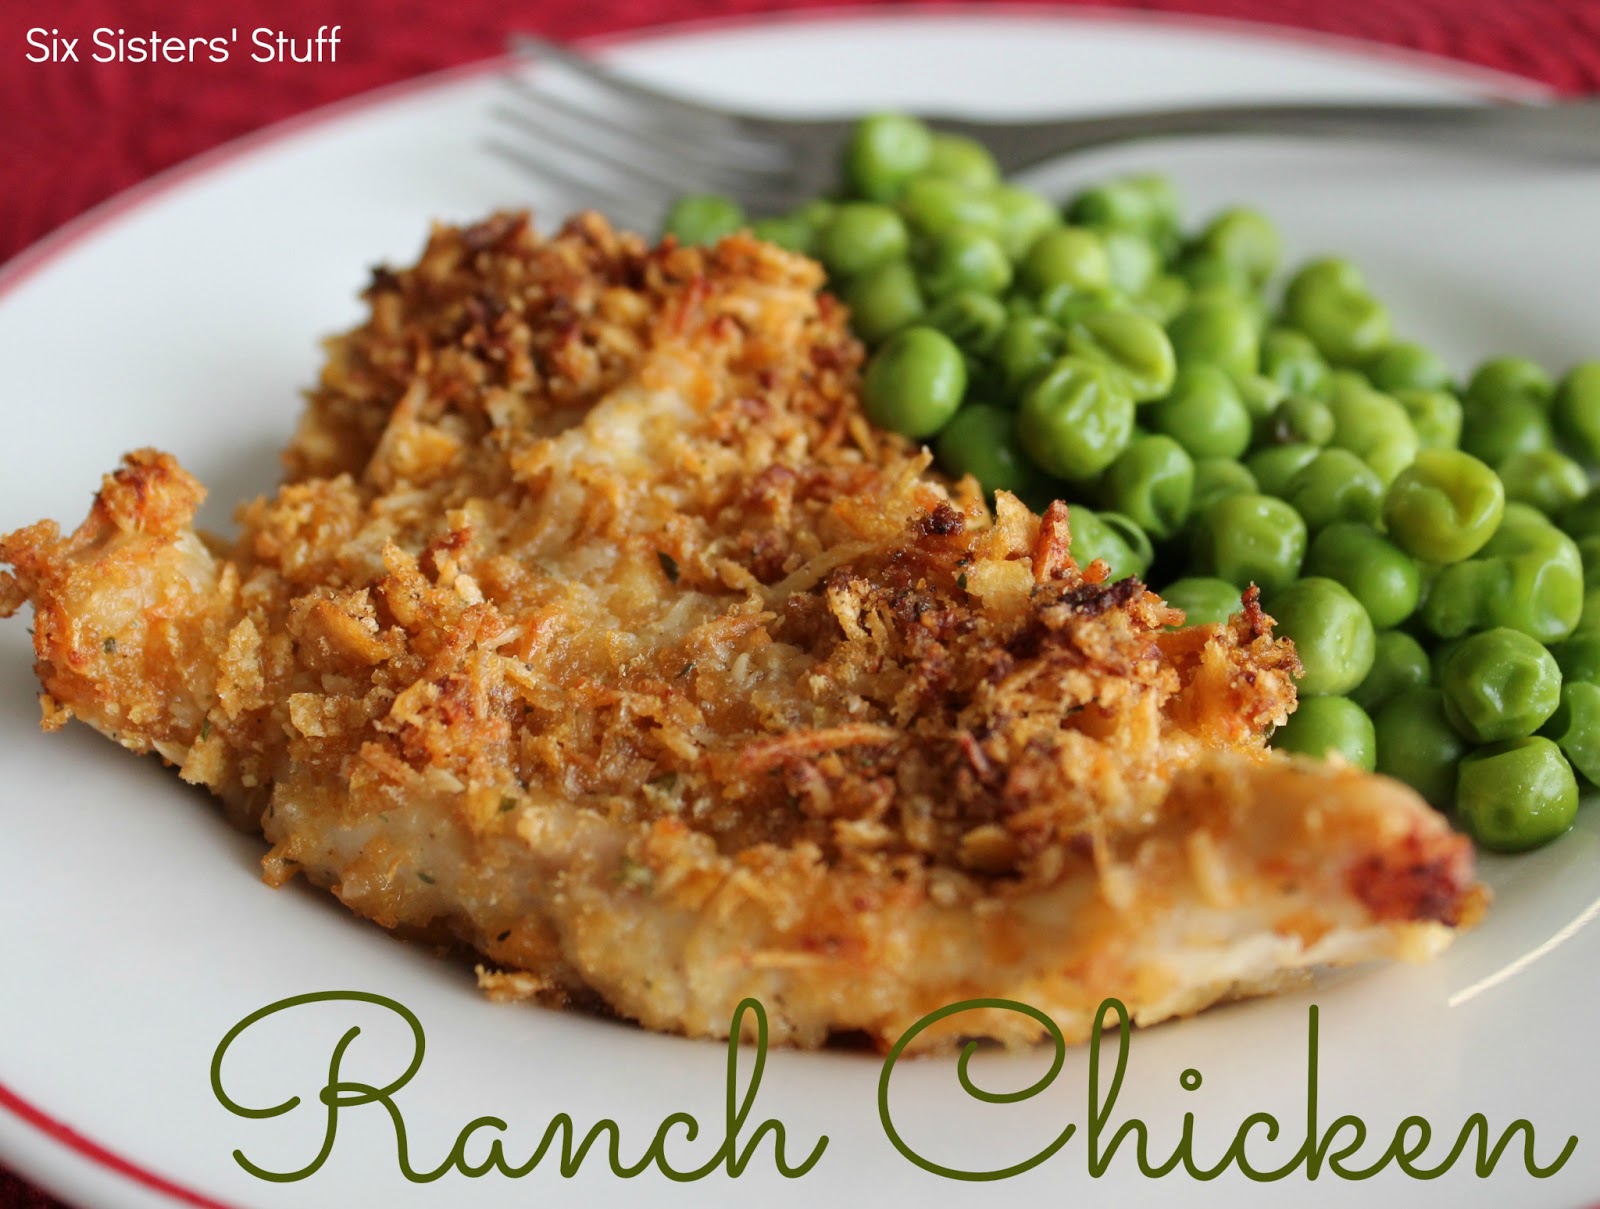 What is a recipe for ranch chicken?